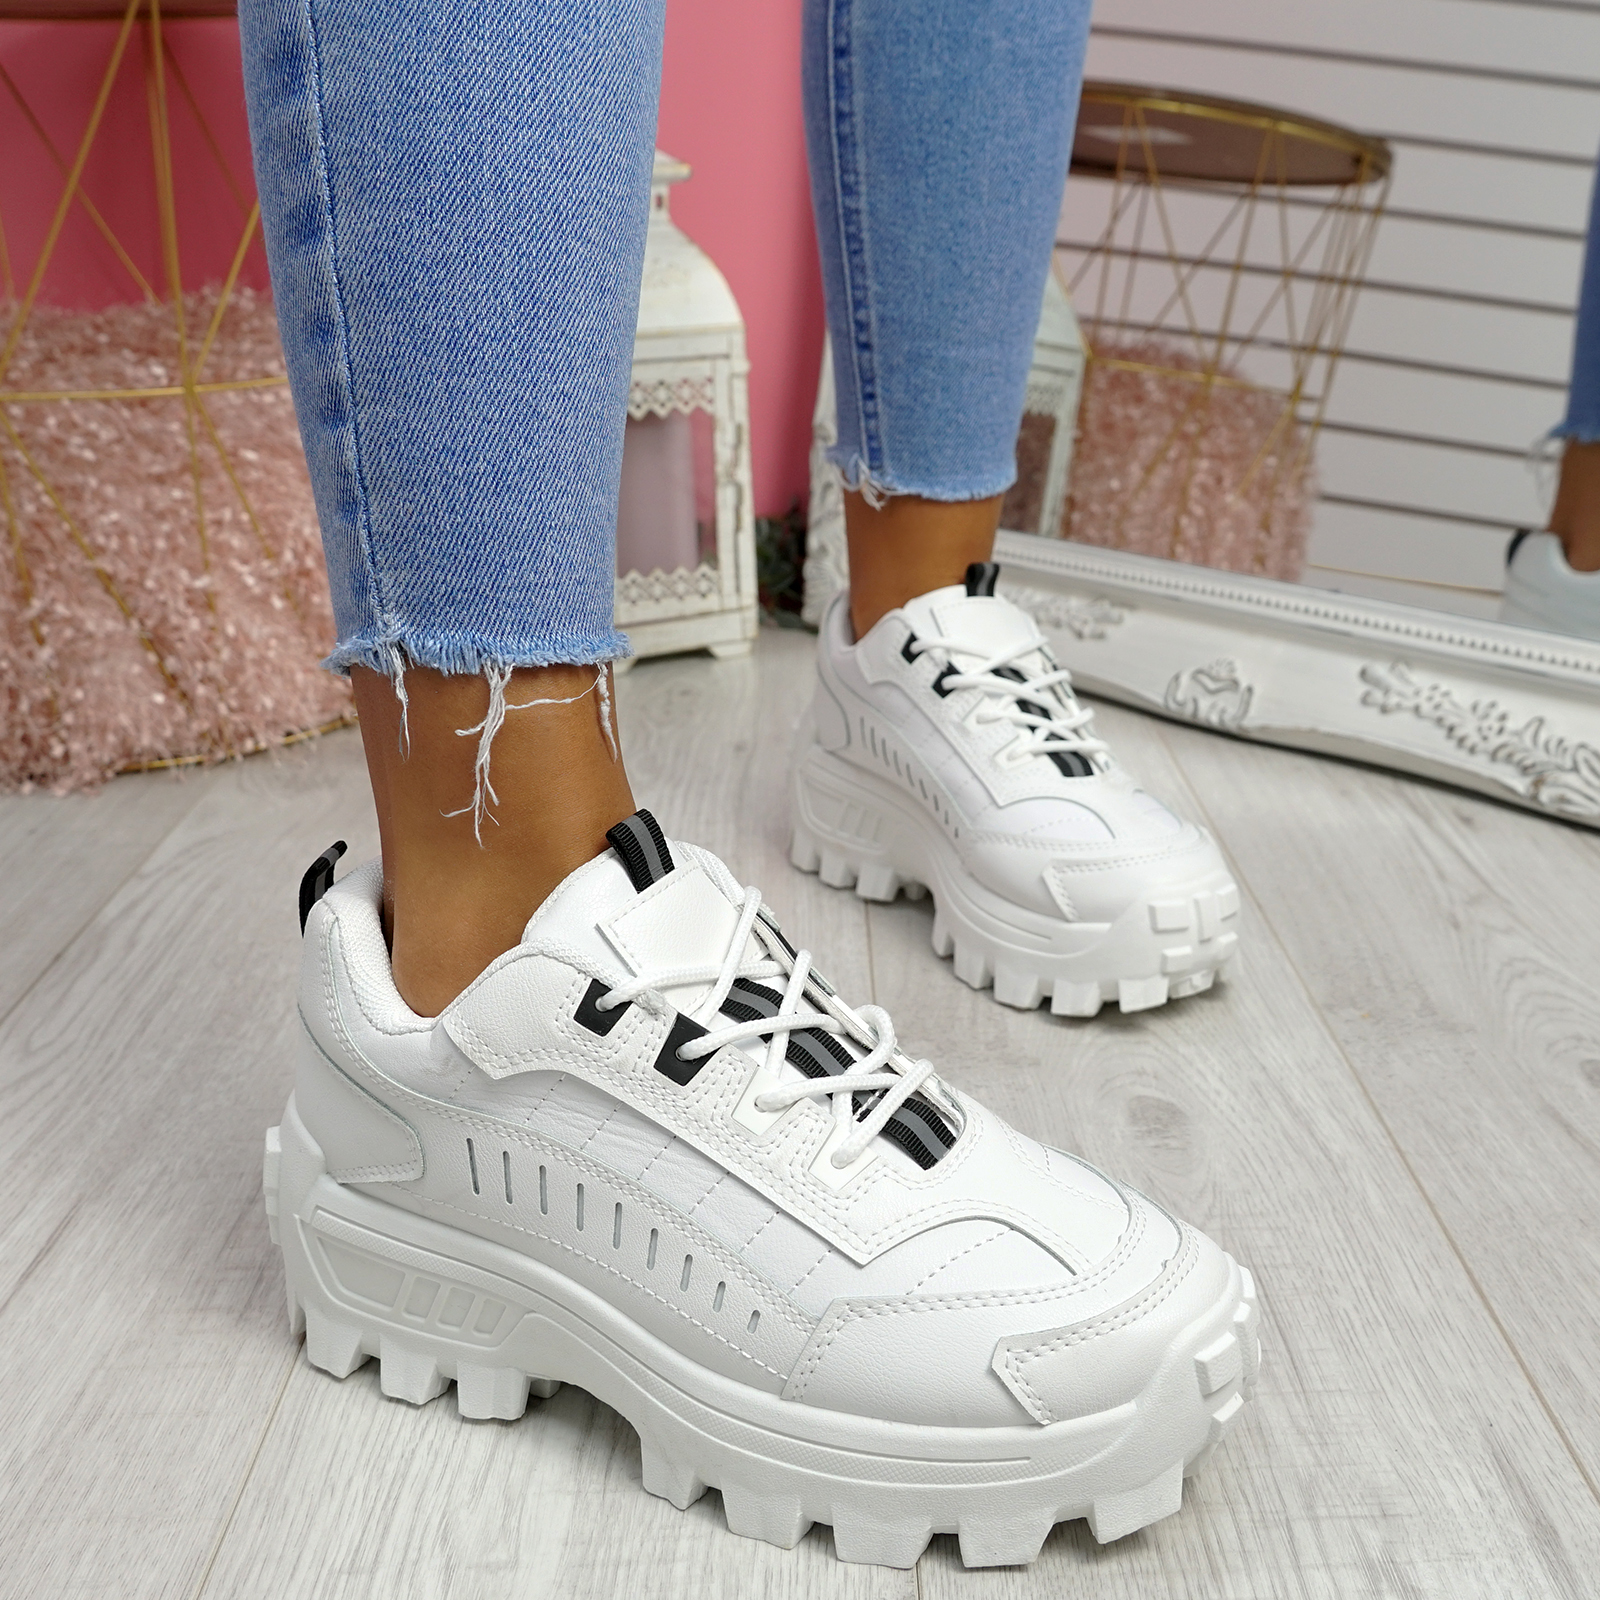 WOMENS LADIES HIGH TOP CHUNKY TRAINERS PLATFORM LACE UP SNEAKERS WOMEN SHOES